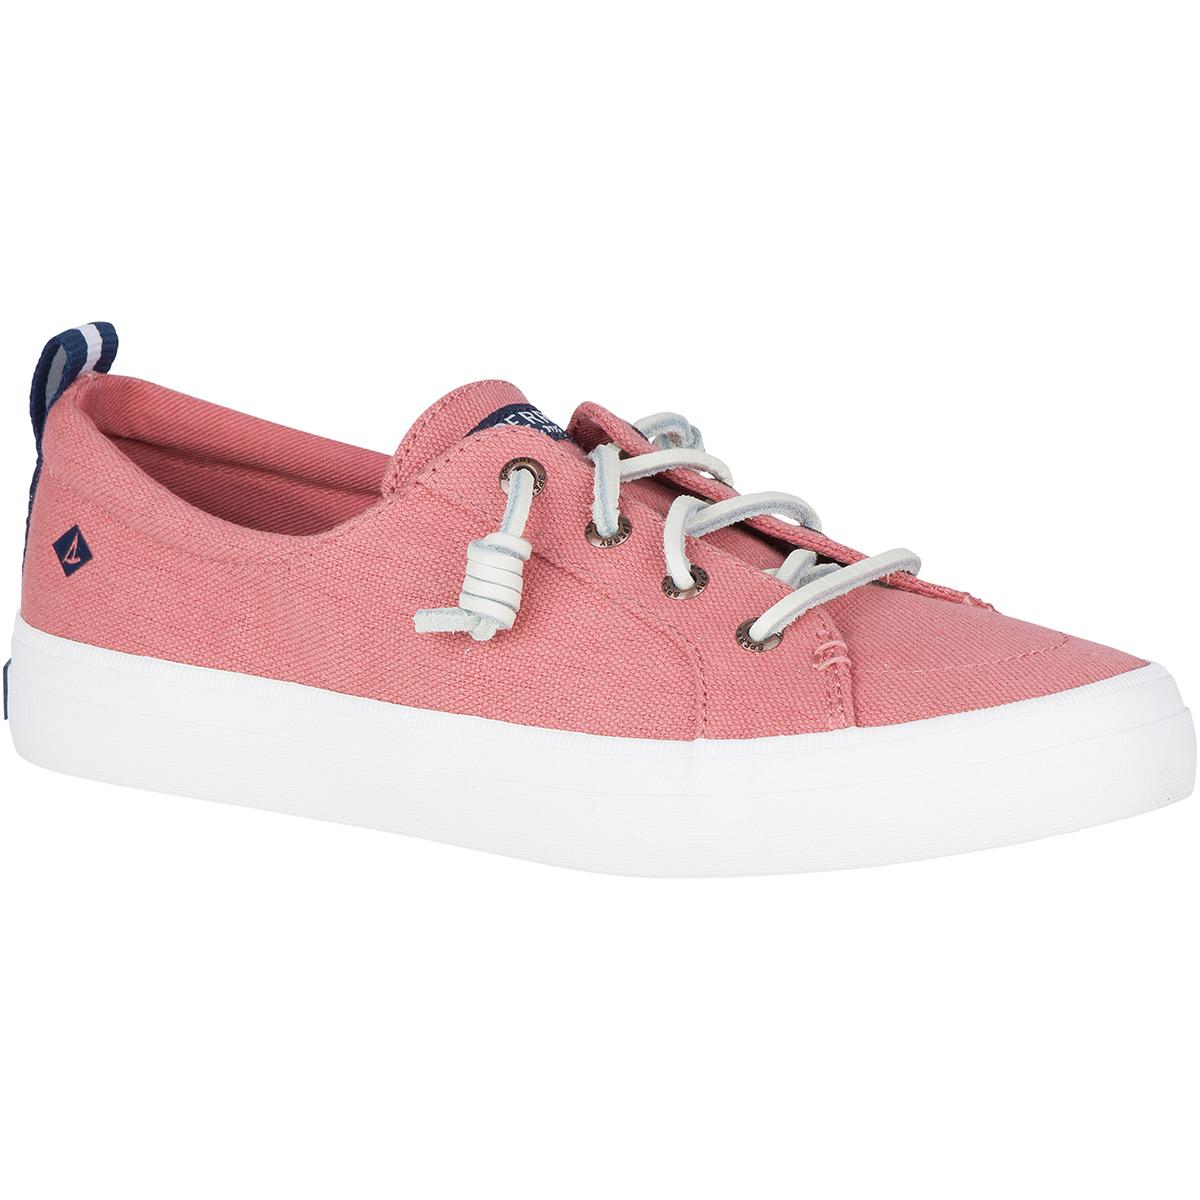 Sperry Women's Crest Vibe Sneakers - Red, 10